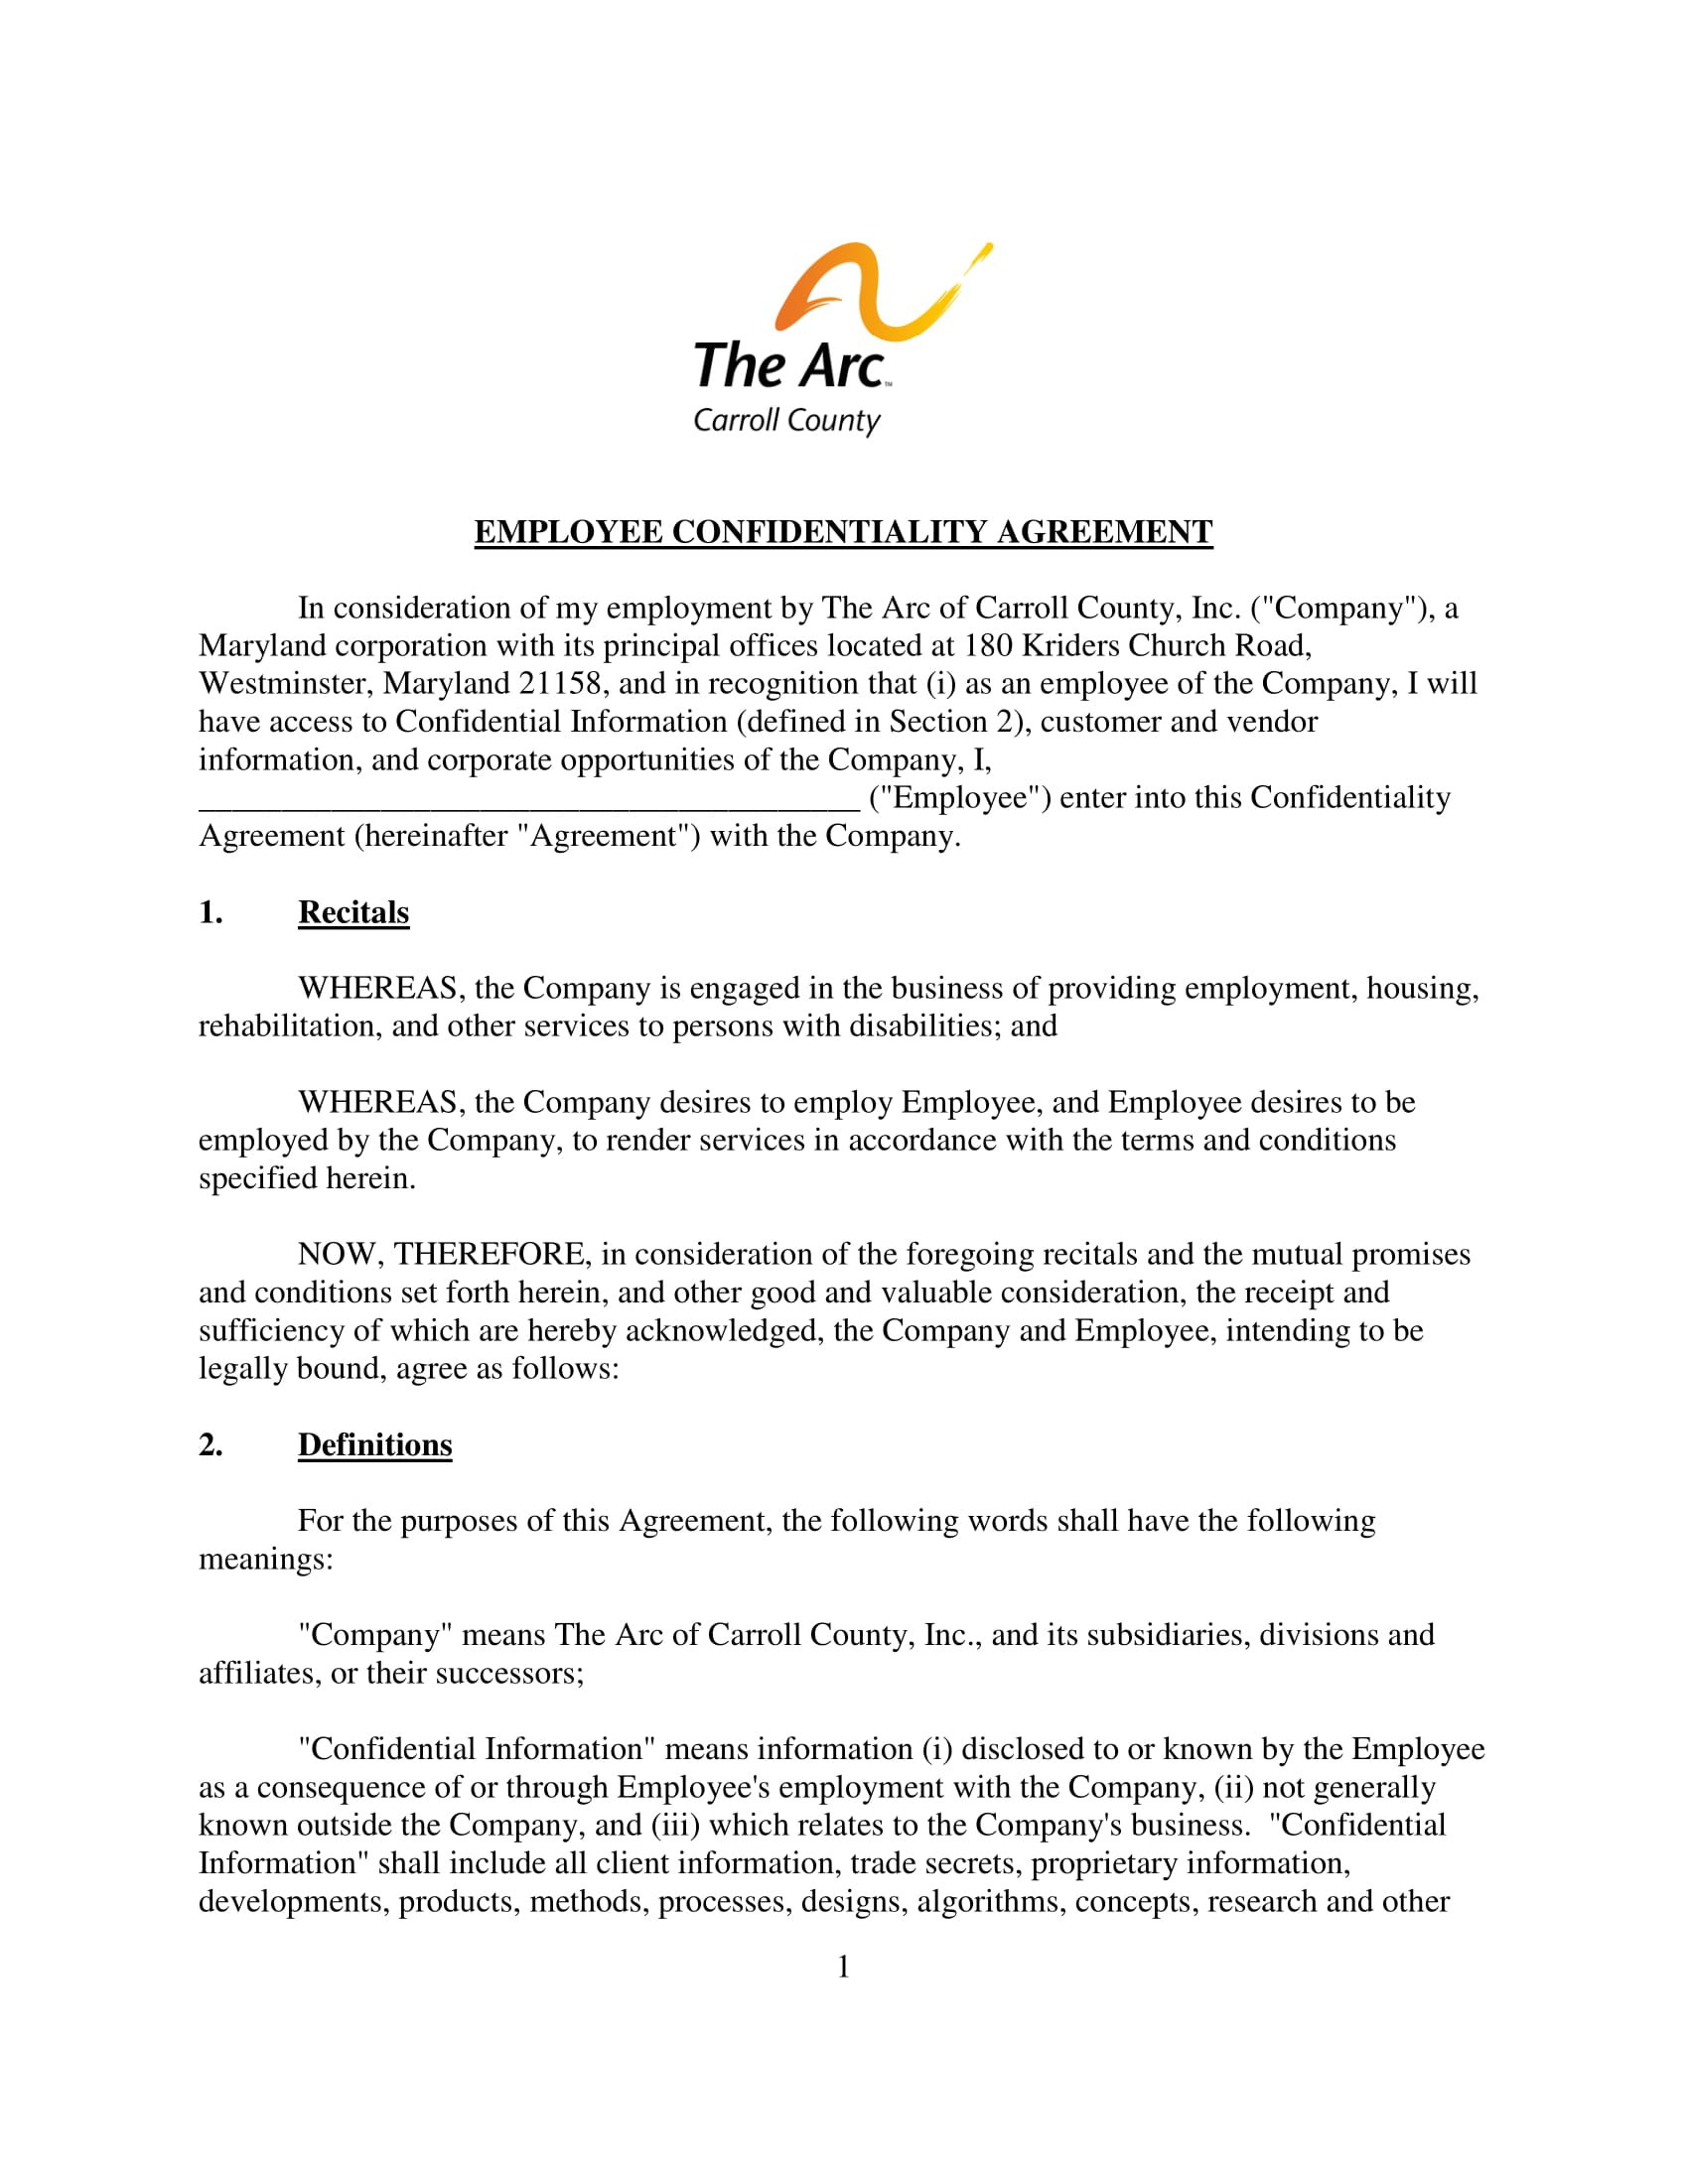 Employee Confidentiality Agreement Examples  Pdf Word  Examples with Word Employee Confidentiality Agreement Templates